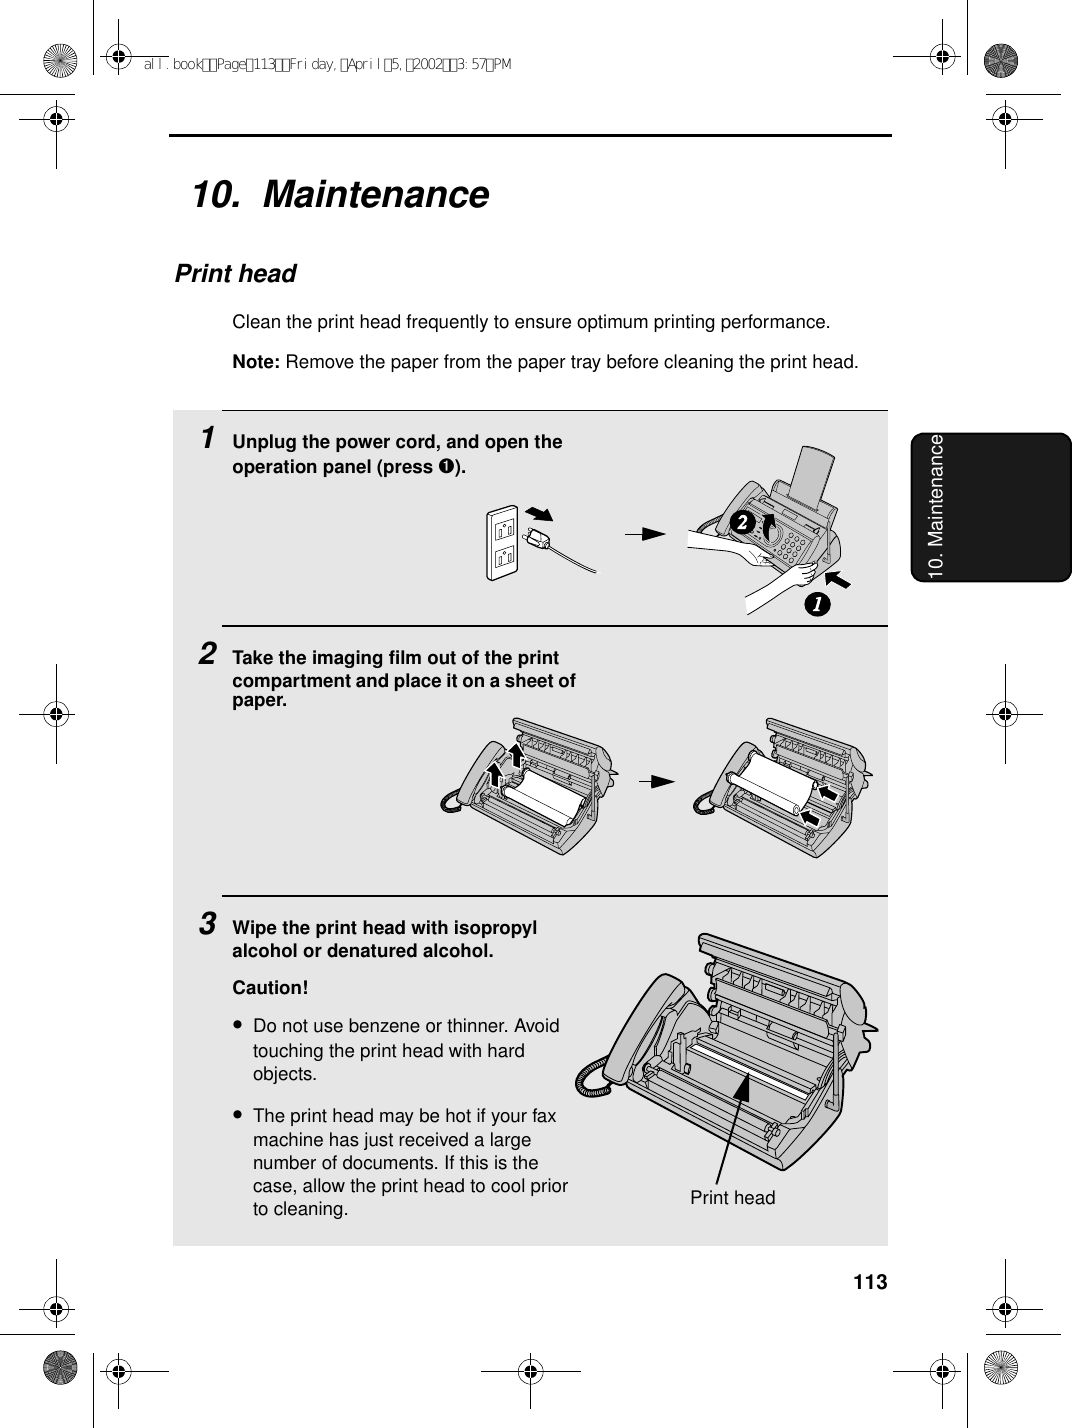 11310. Maintenance10.  MaintenancePrint headClean the print head frequently to ensure optimum printing performance.Note: Remove the paper from the paper tray before cleaning the print head.1Unplug the power cord, and open the operation panel (press ➊).2Take the imaging film out of the print compartment and place it on a sheet of paper.3Wipe the print head with isopropyl alcohol or denatured alcohol.Caution!•Do not use benzene or thinner. Avoid touching the print head with hard objects.•The print head may be hot if your fax machine has just received a large number of documents. If this is the case, allow the print head to cool prior to cleaning.12Print headall.bookPage113Friday,April5,20023:57PM